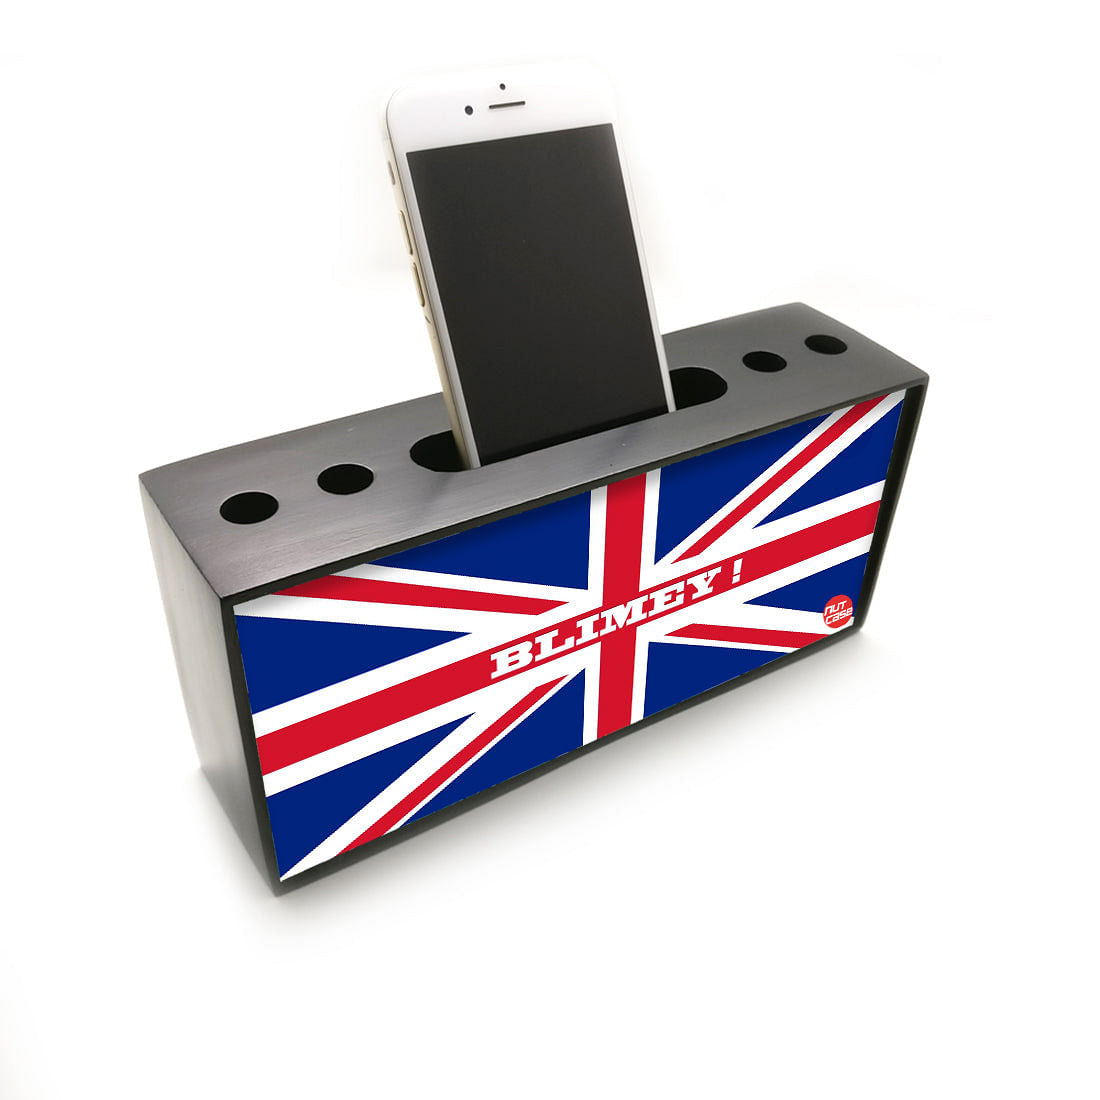 Phone and Pen Holder Table Organizer for Office Use - Blimey Nutcase